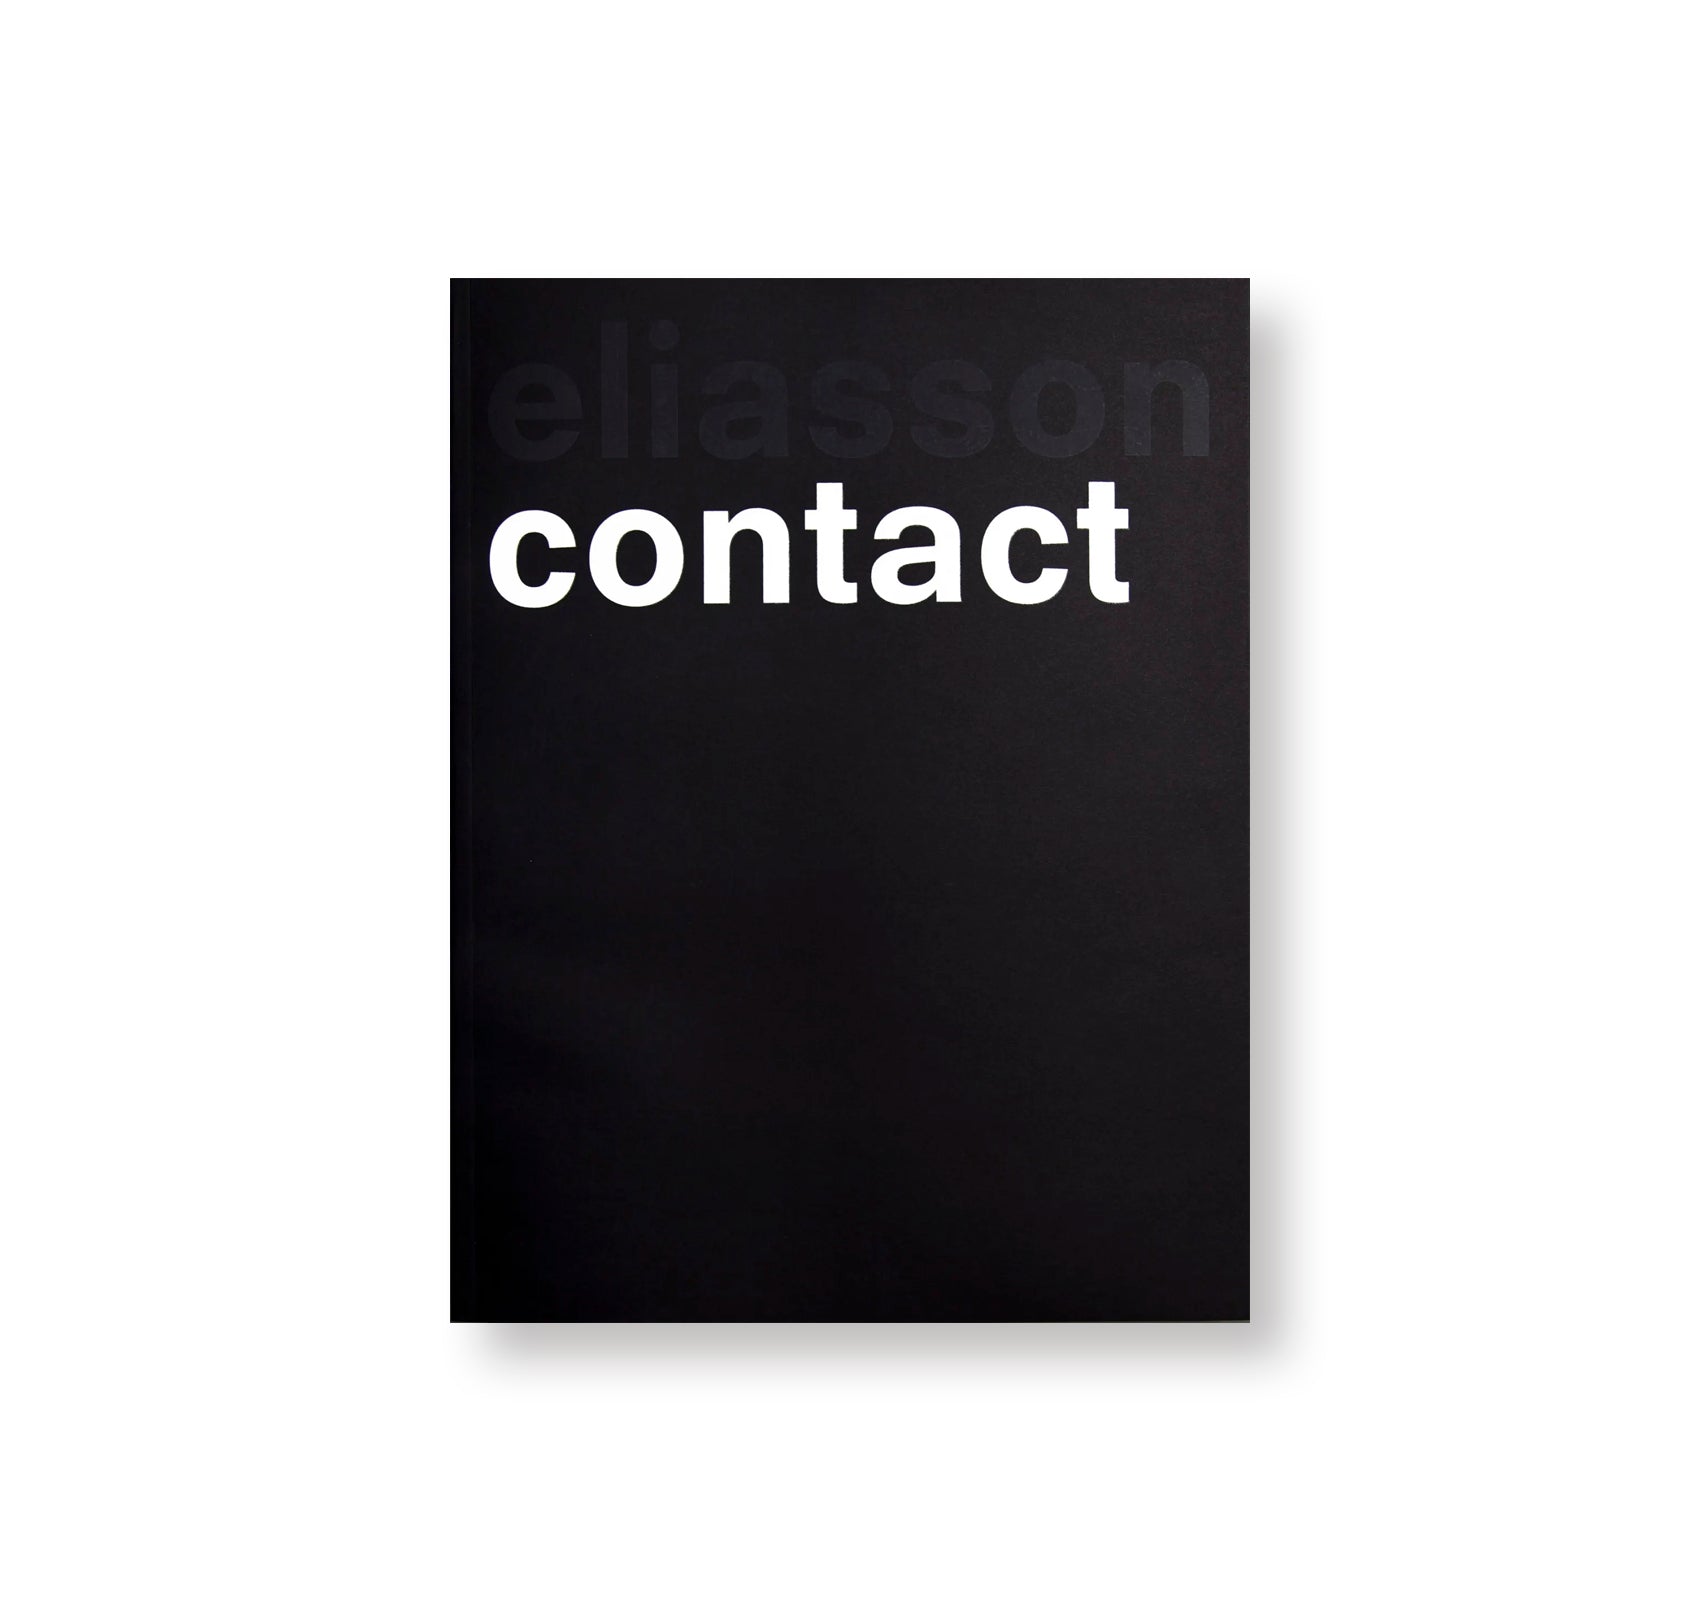 CONTACT by Olafur Eliasson